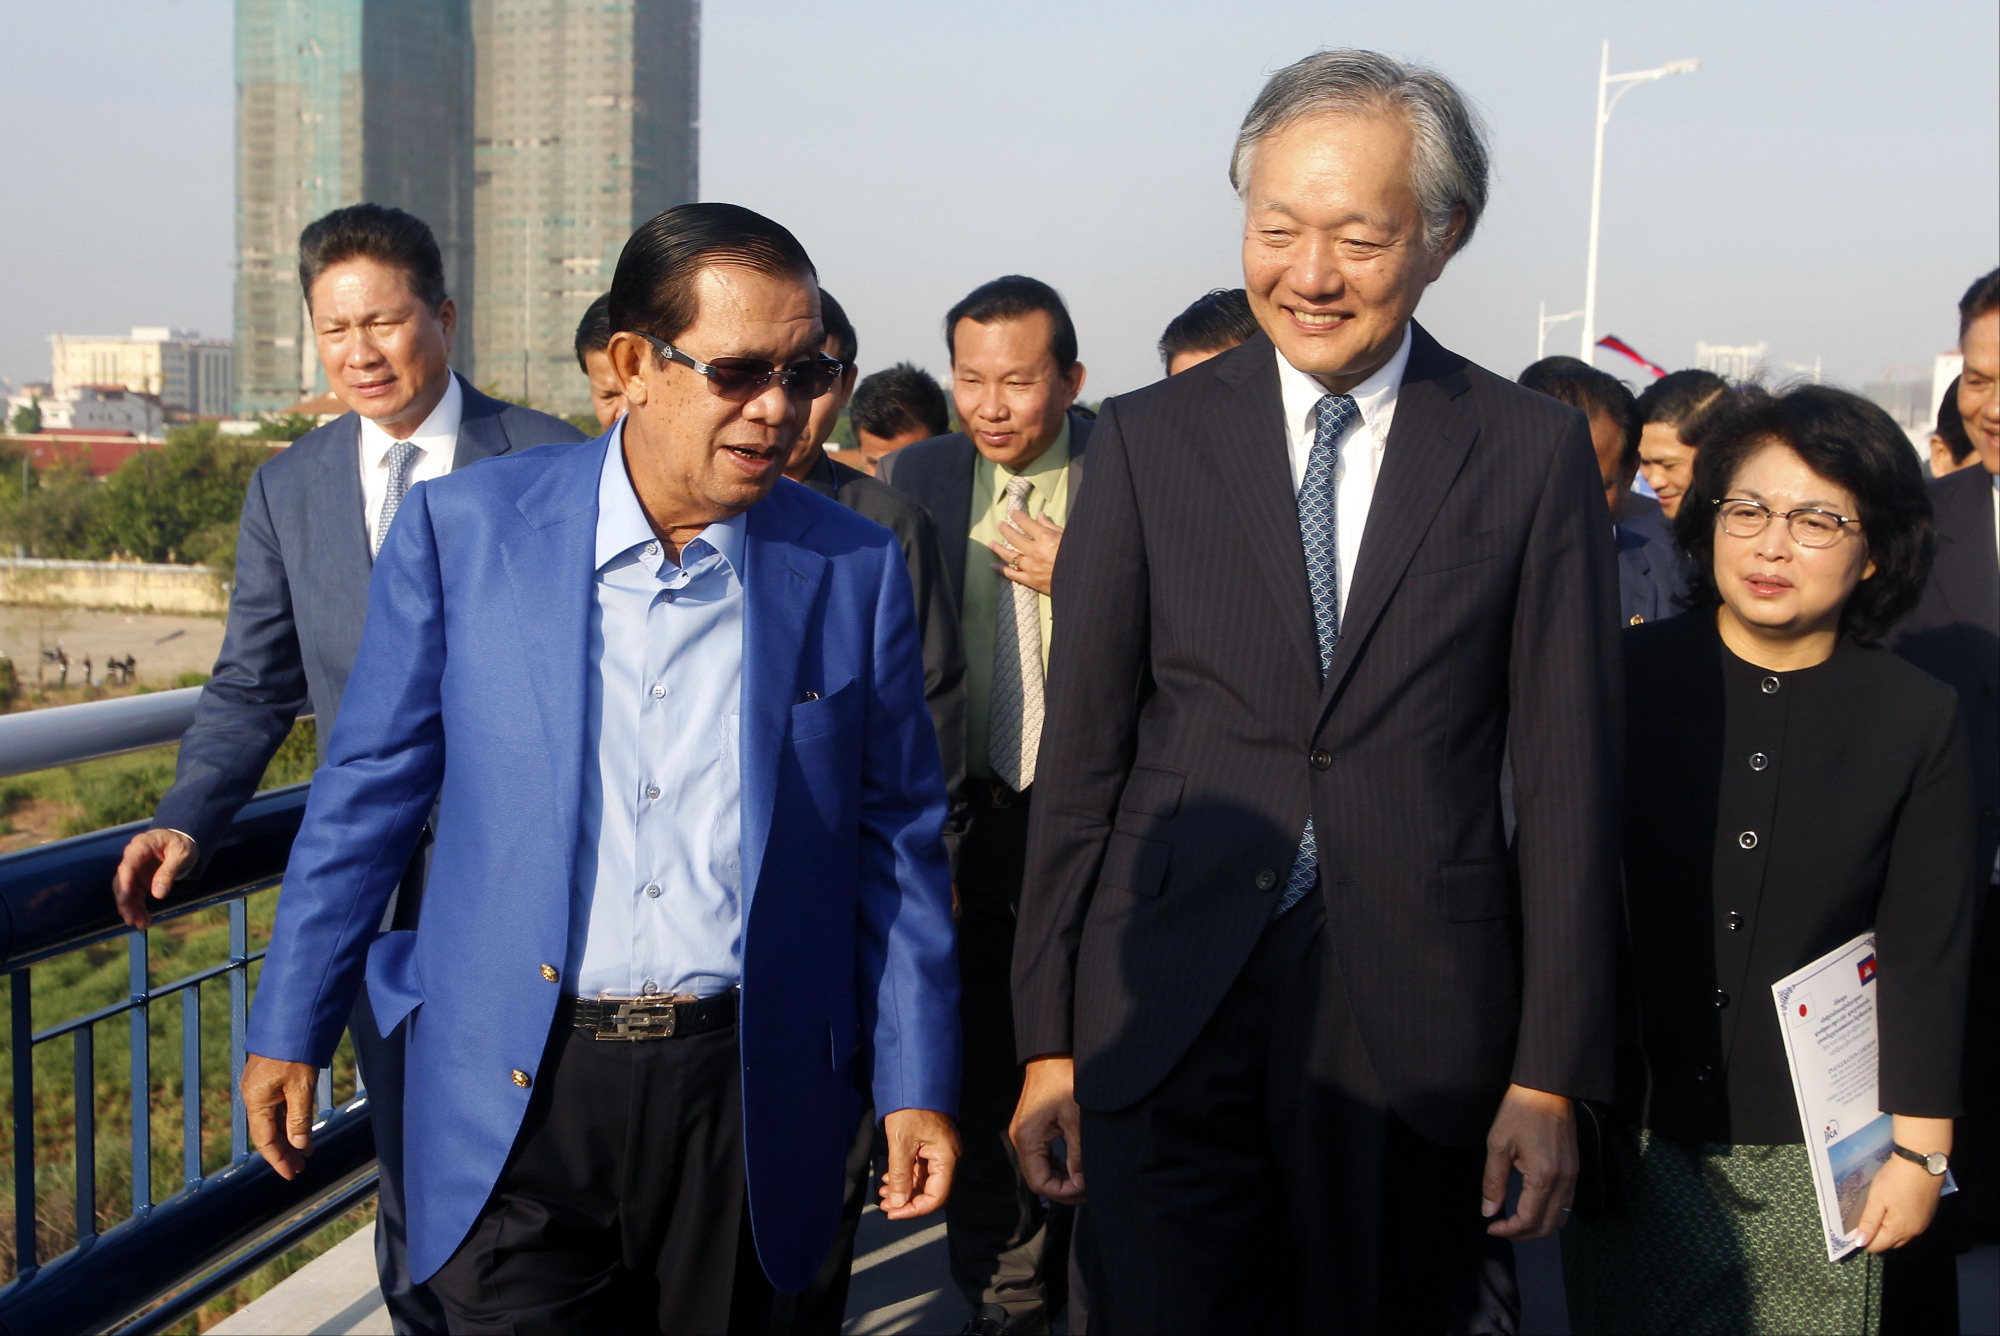 Ambassador to Cambodia Hidehisa Horinouchi and Cambodian Prime Minister Hun Sen attend a ceremony marking the reopening of the newly repaired Cambodia-Japan friendship bridge in Phnom Penh on April 3. A bridge was built right next to it in 2014 with aid from China. | AP